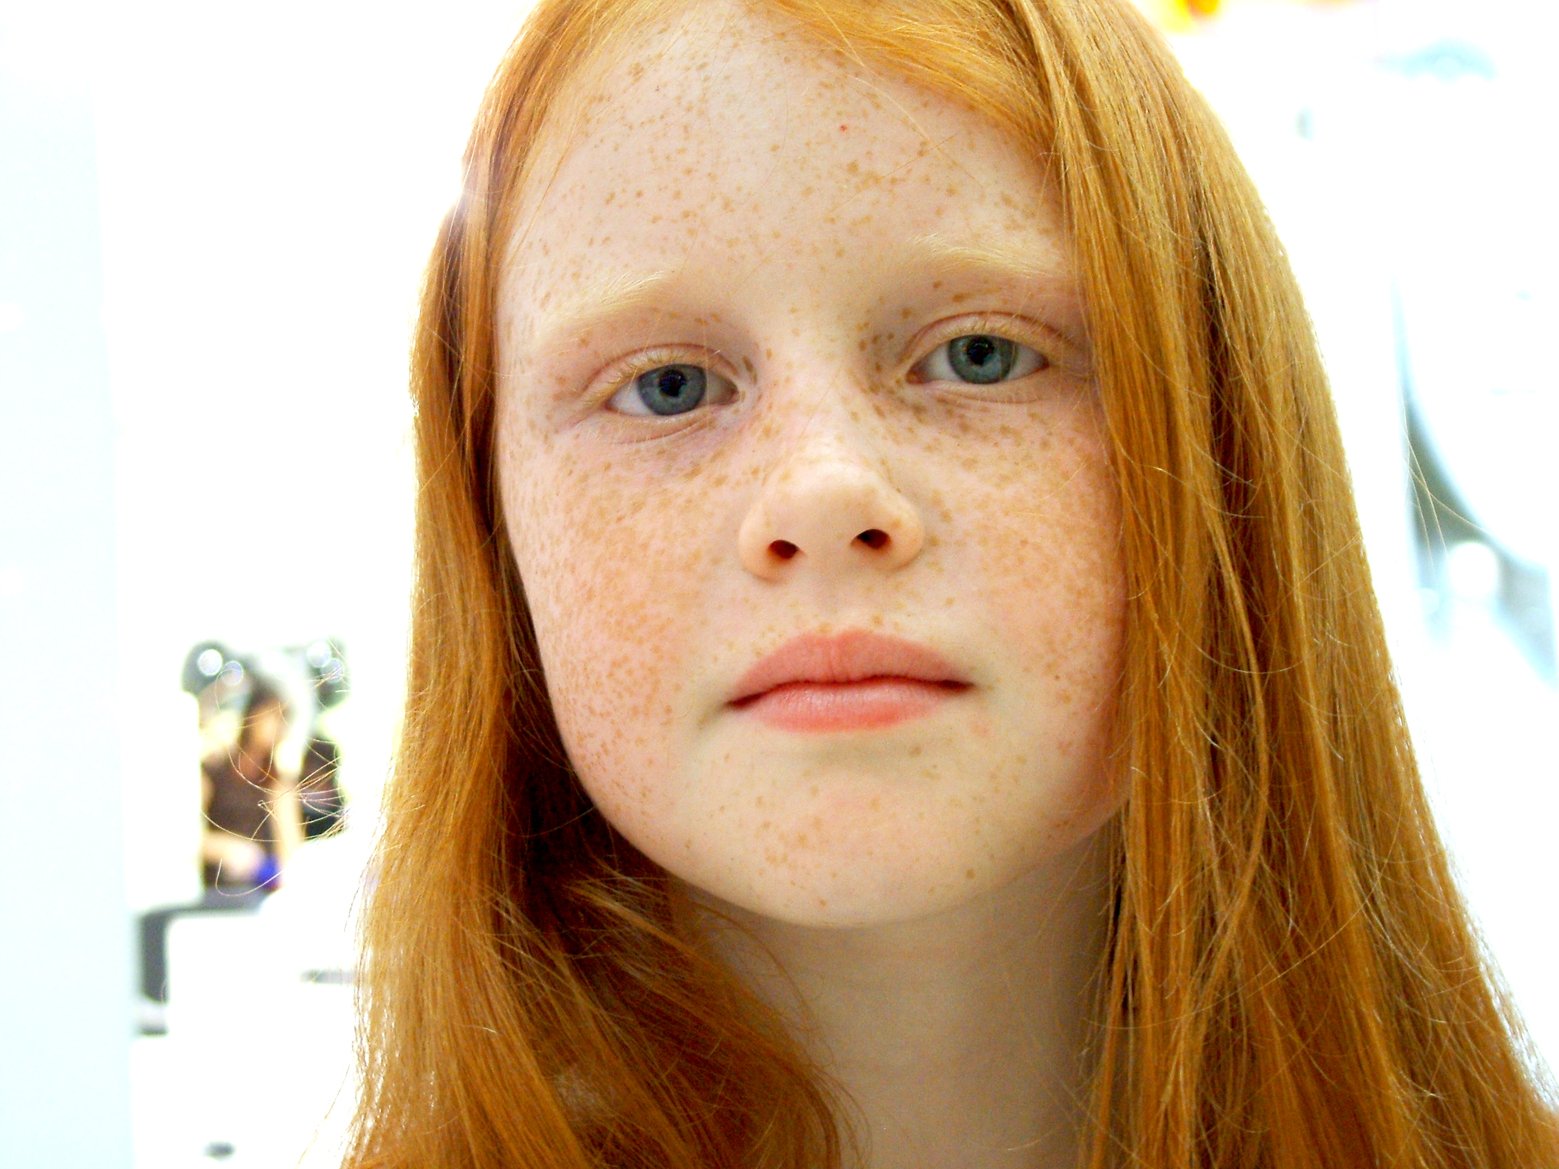 a woman with freckles on her face looking at the camera